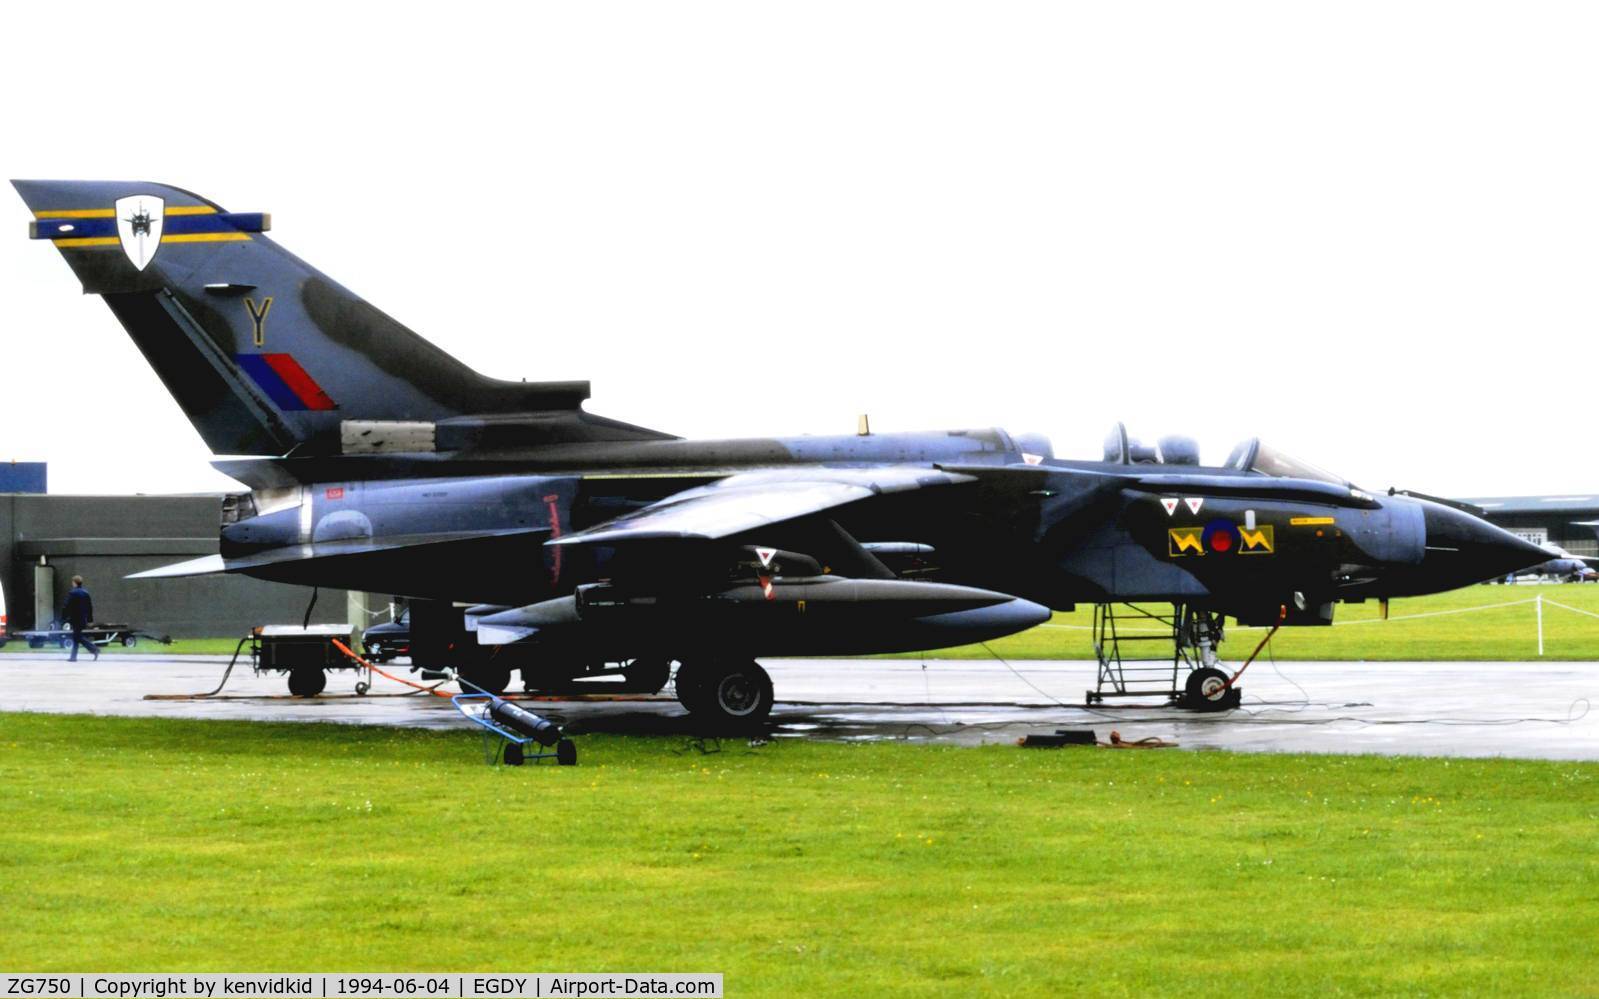 ZG750, 1991 Panavia Tornado GR.1(T) C/N 862/BT051/3420, On static display at the RNAS Yeovilton 1994 50th Anniversary of D Day photocall. It rained all day.